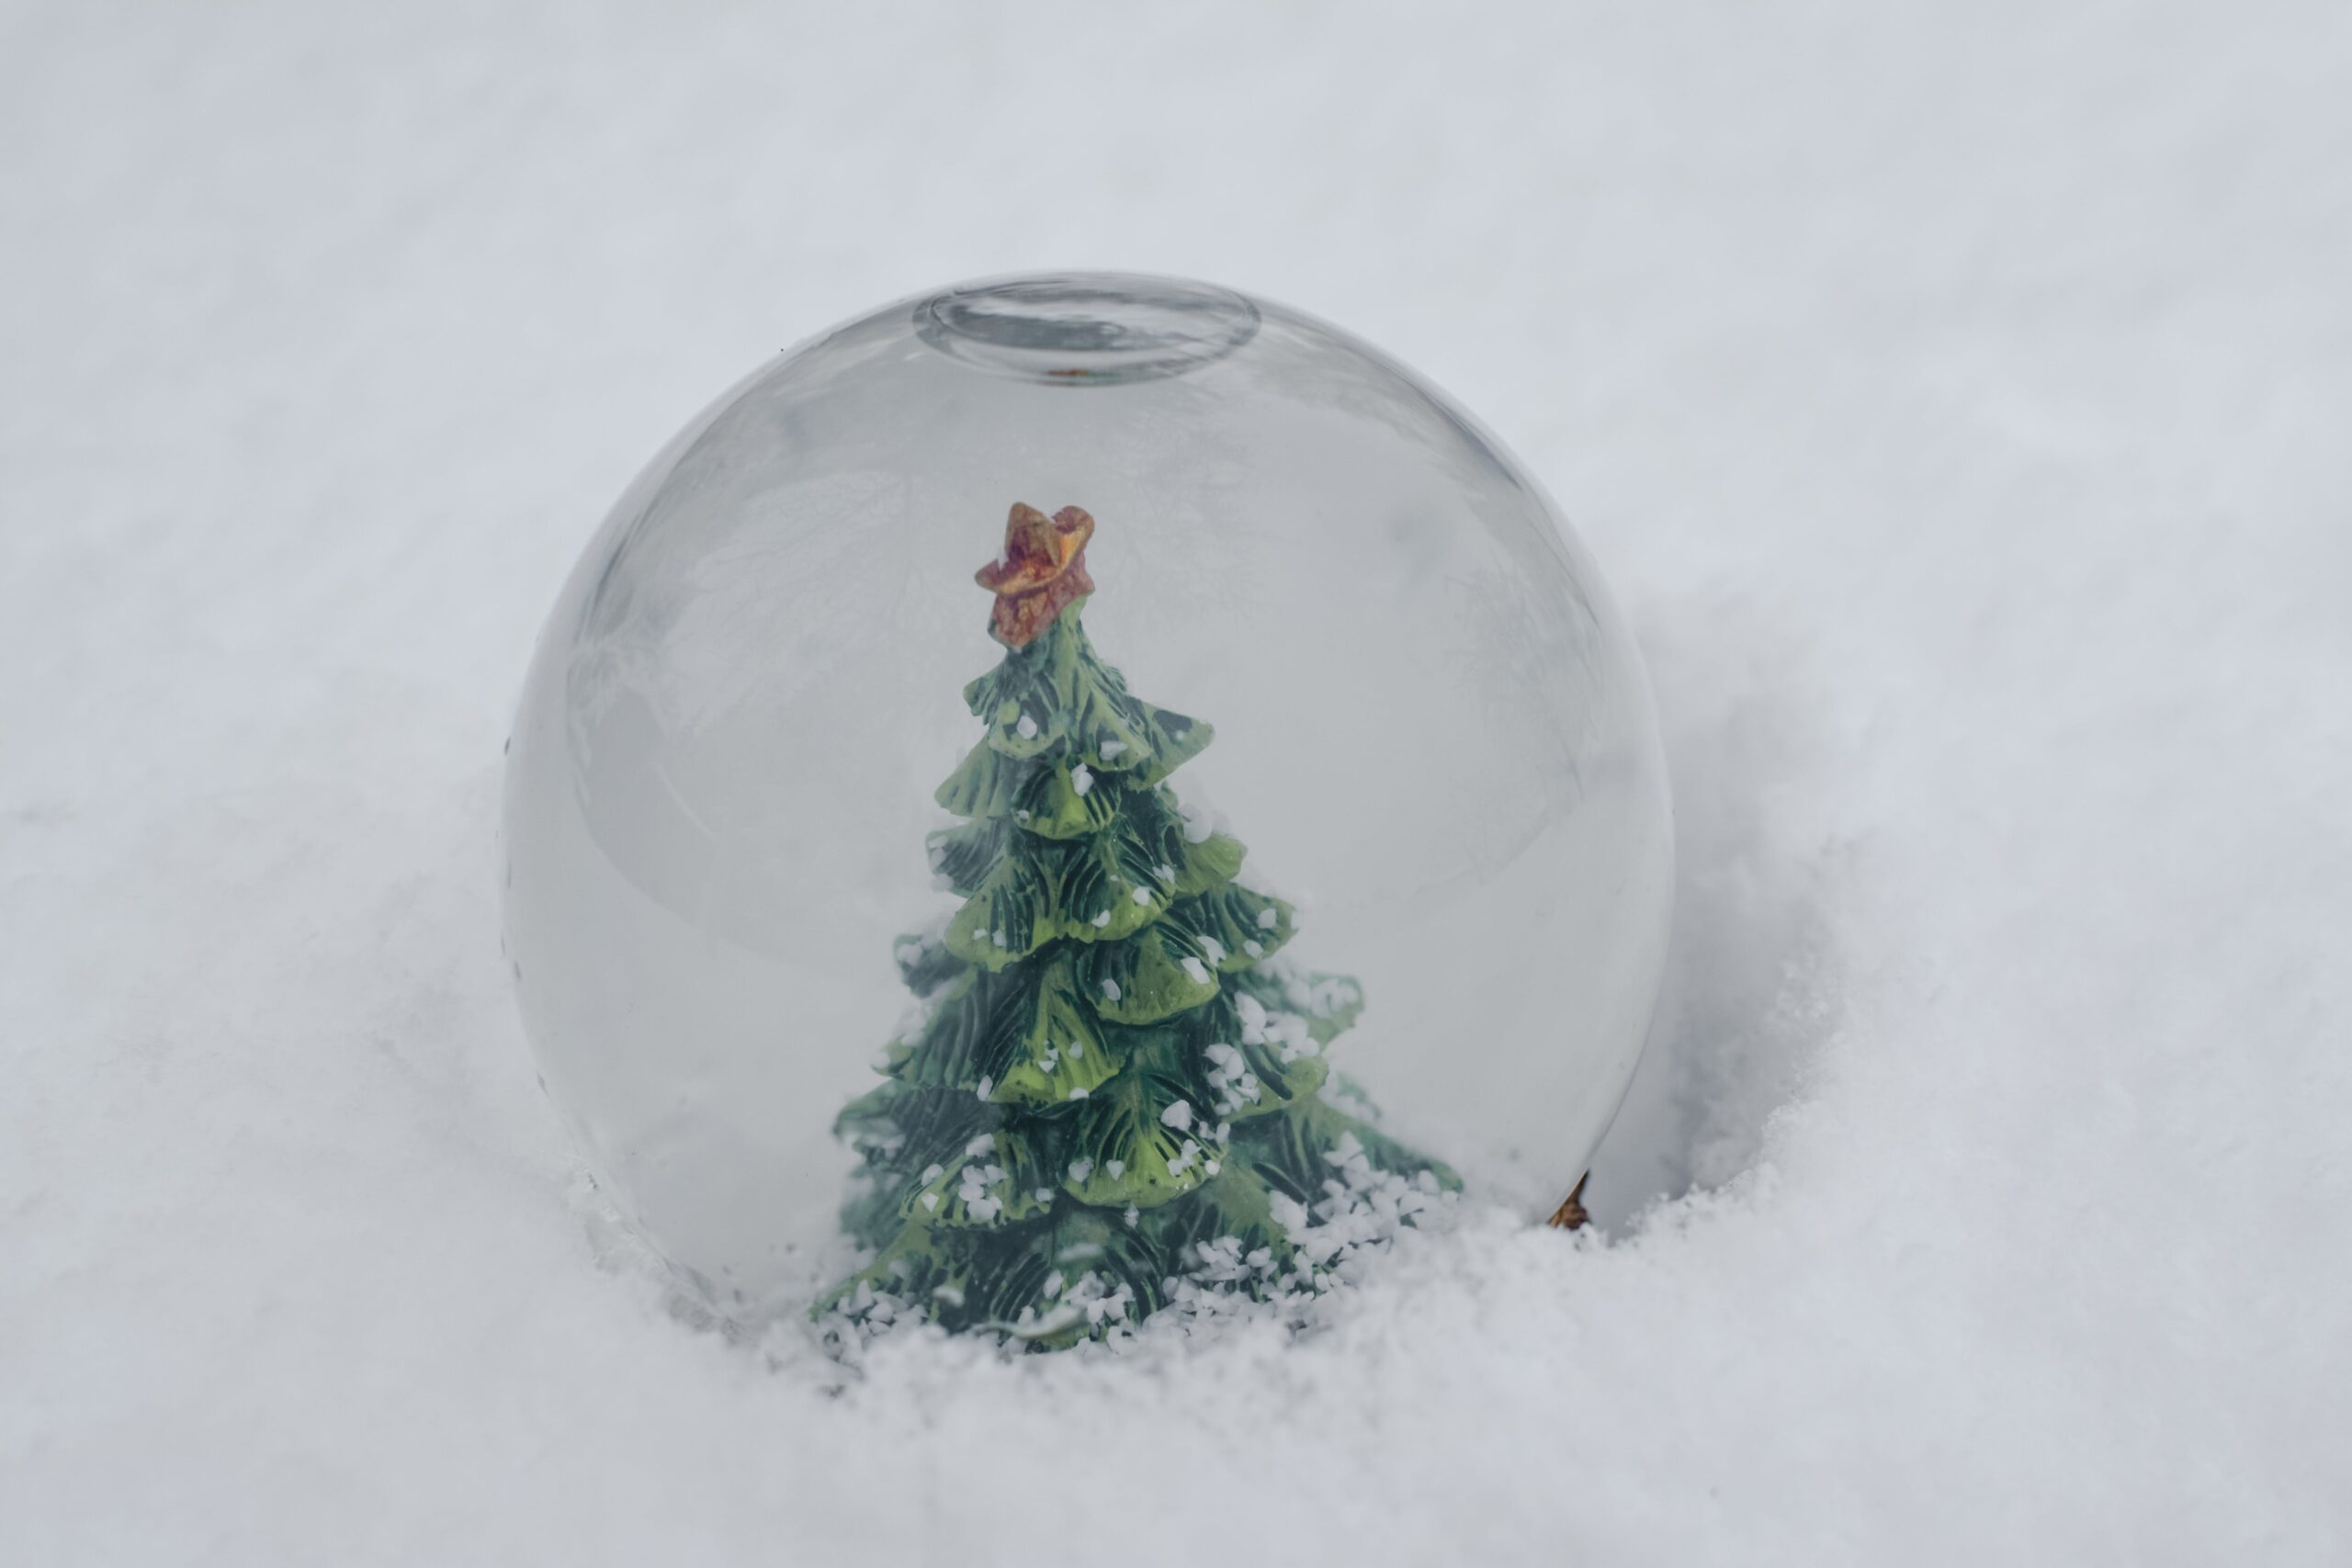 A waterless snow globe is the perfect mess-free DIY Christmas craft for the kids. Pictured: A Christmas snow globe